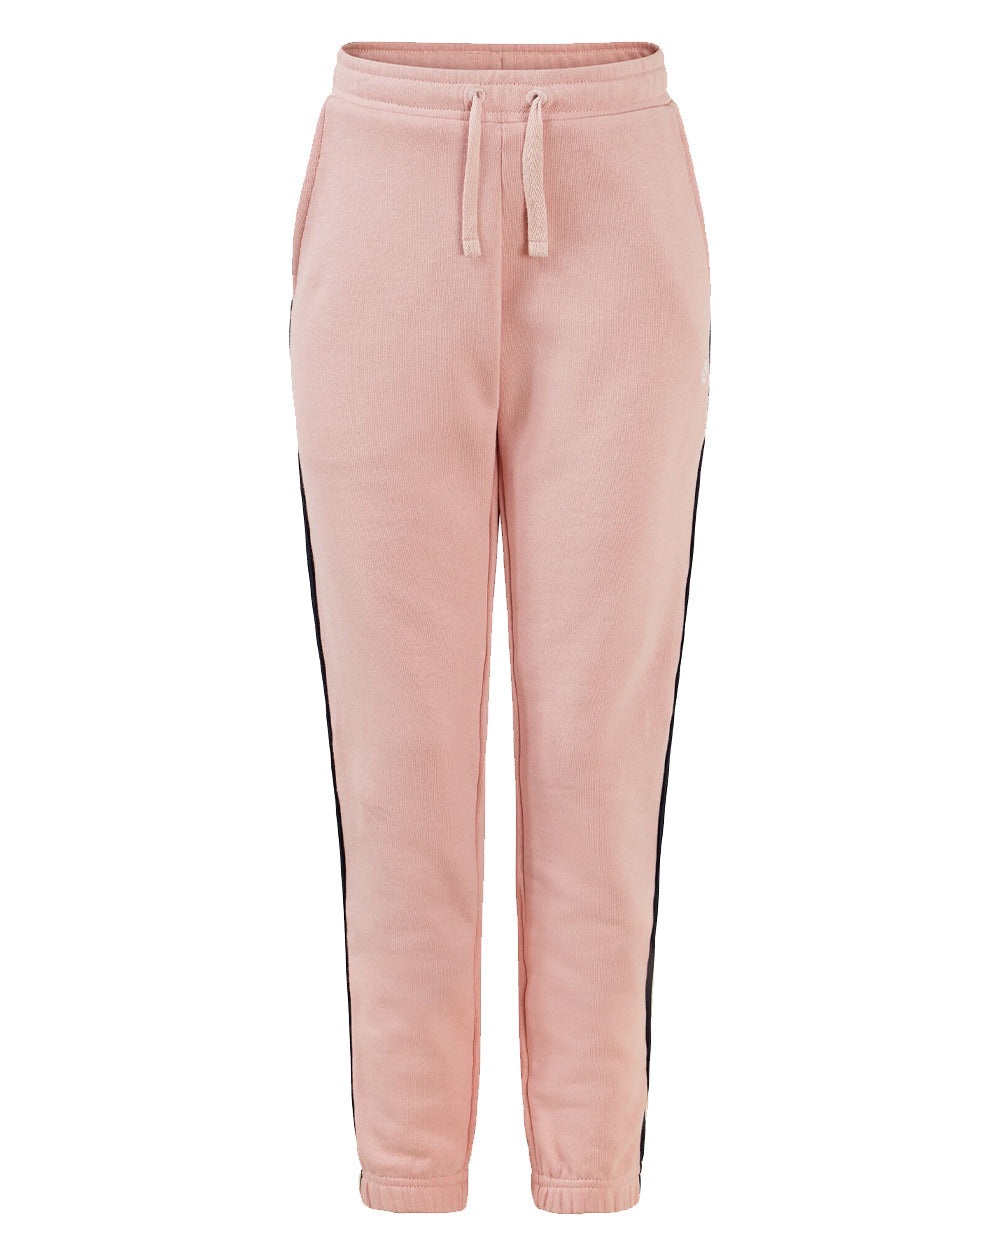 Pink Clay Coloured Craghoppers Childrens NosiLife Brodie Trousers On A White Background 